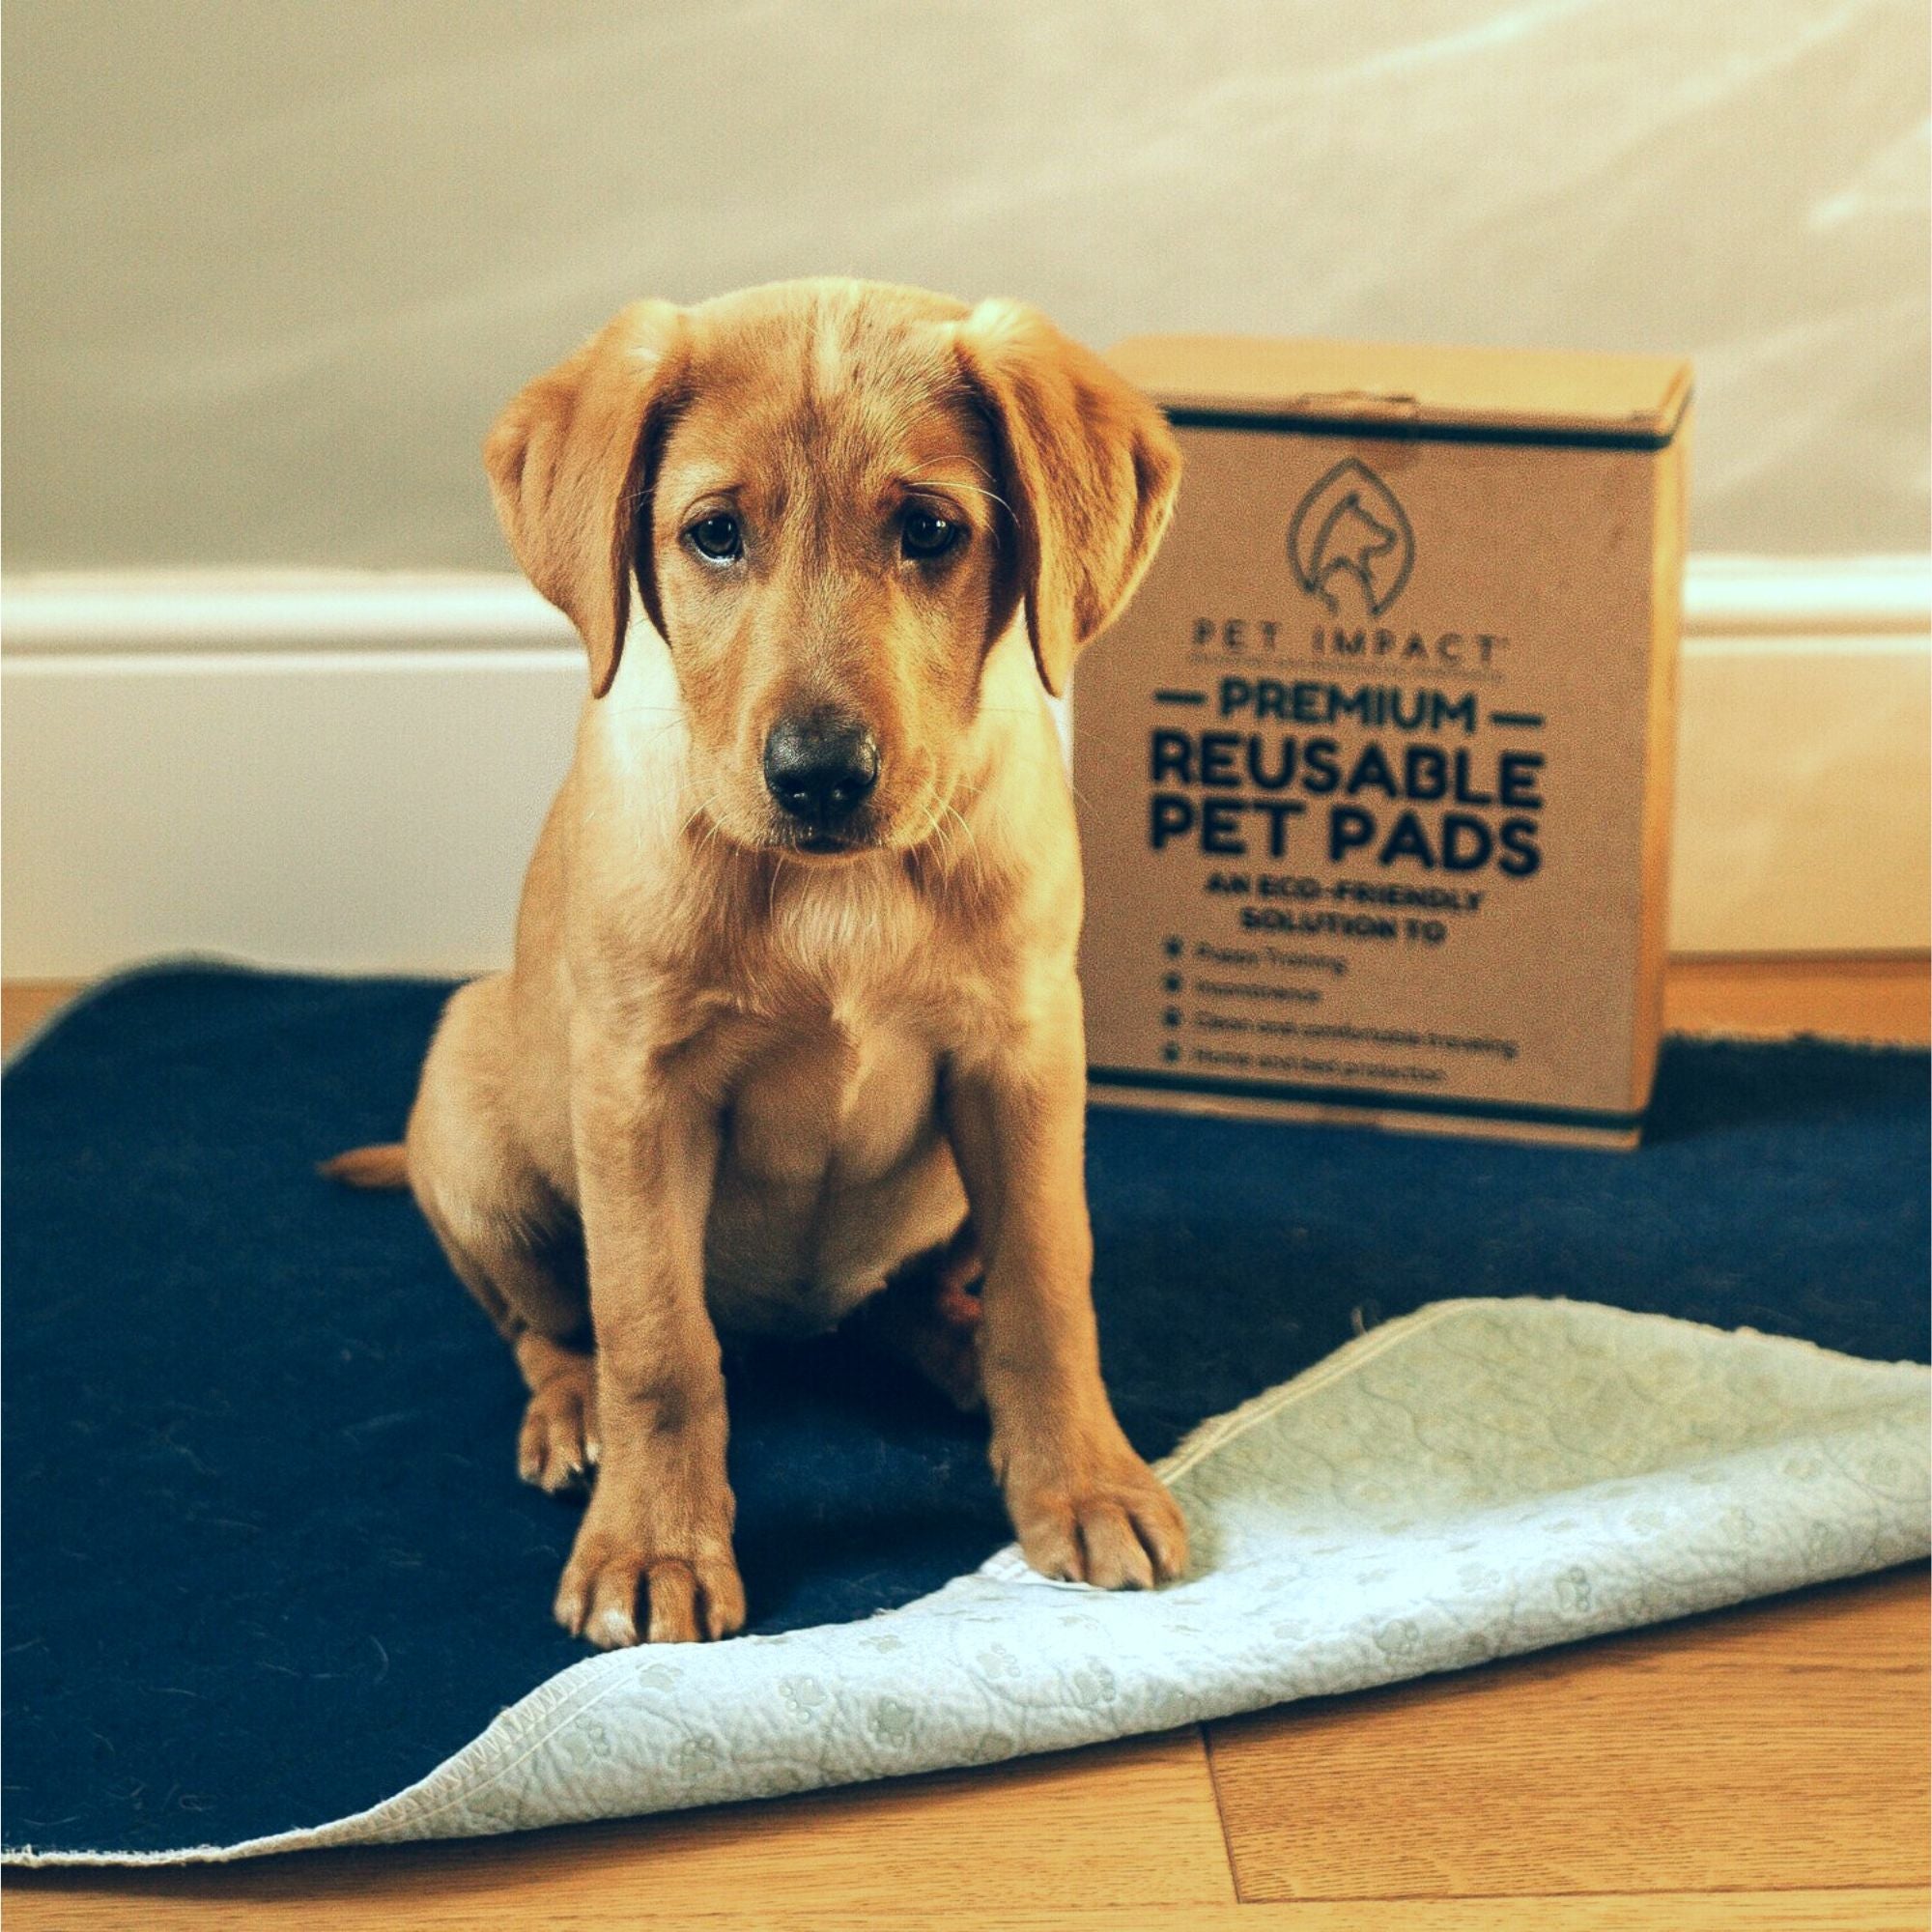 A cute puppy sat on top of a reusable pee pad